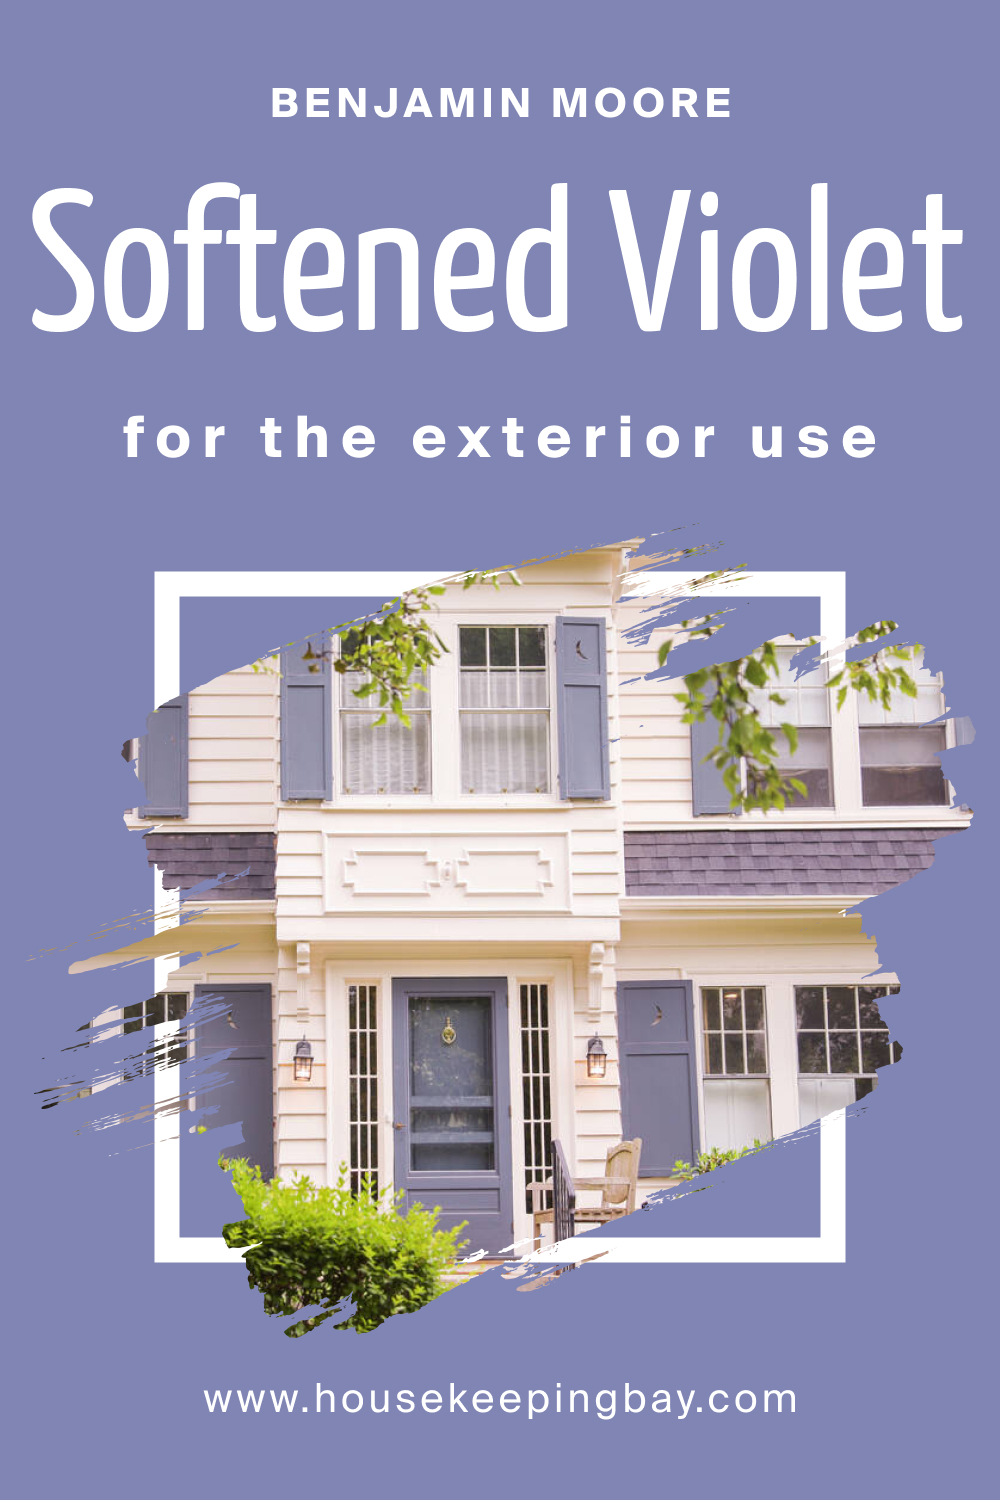 How to Use BM Softened Violet 1420 for an Exterior?